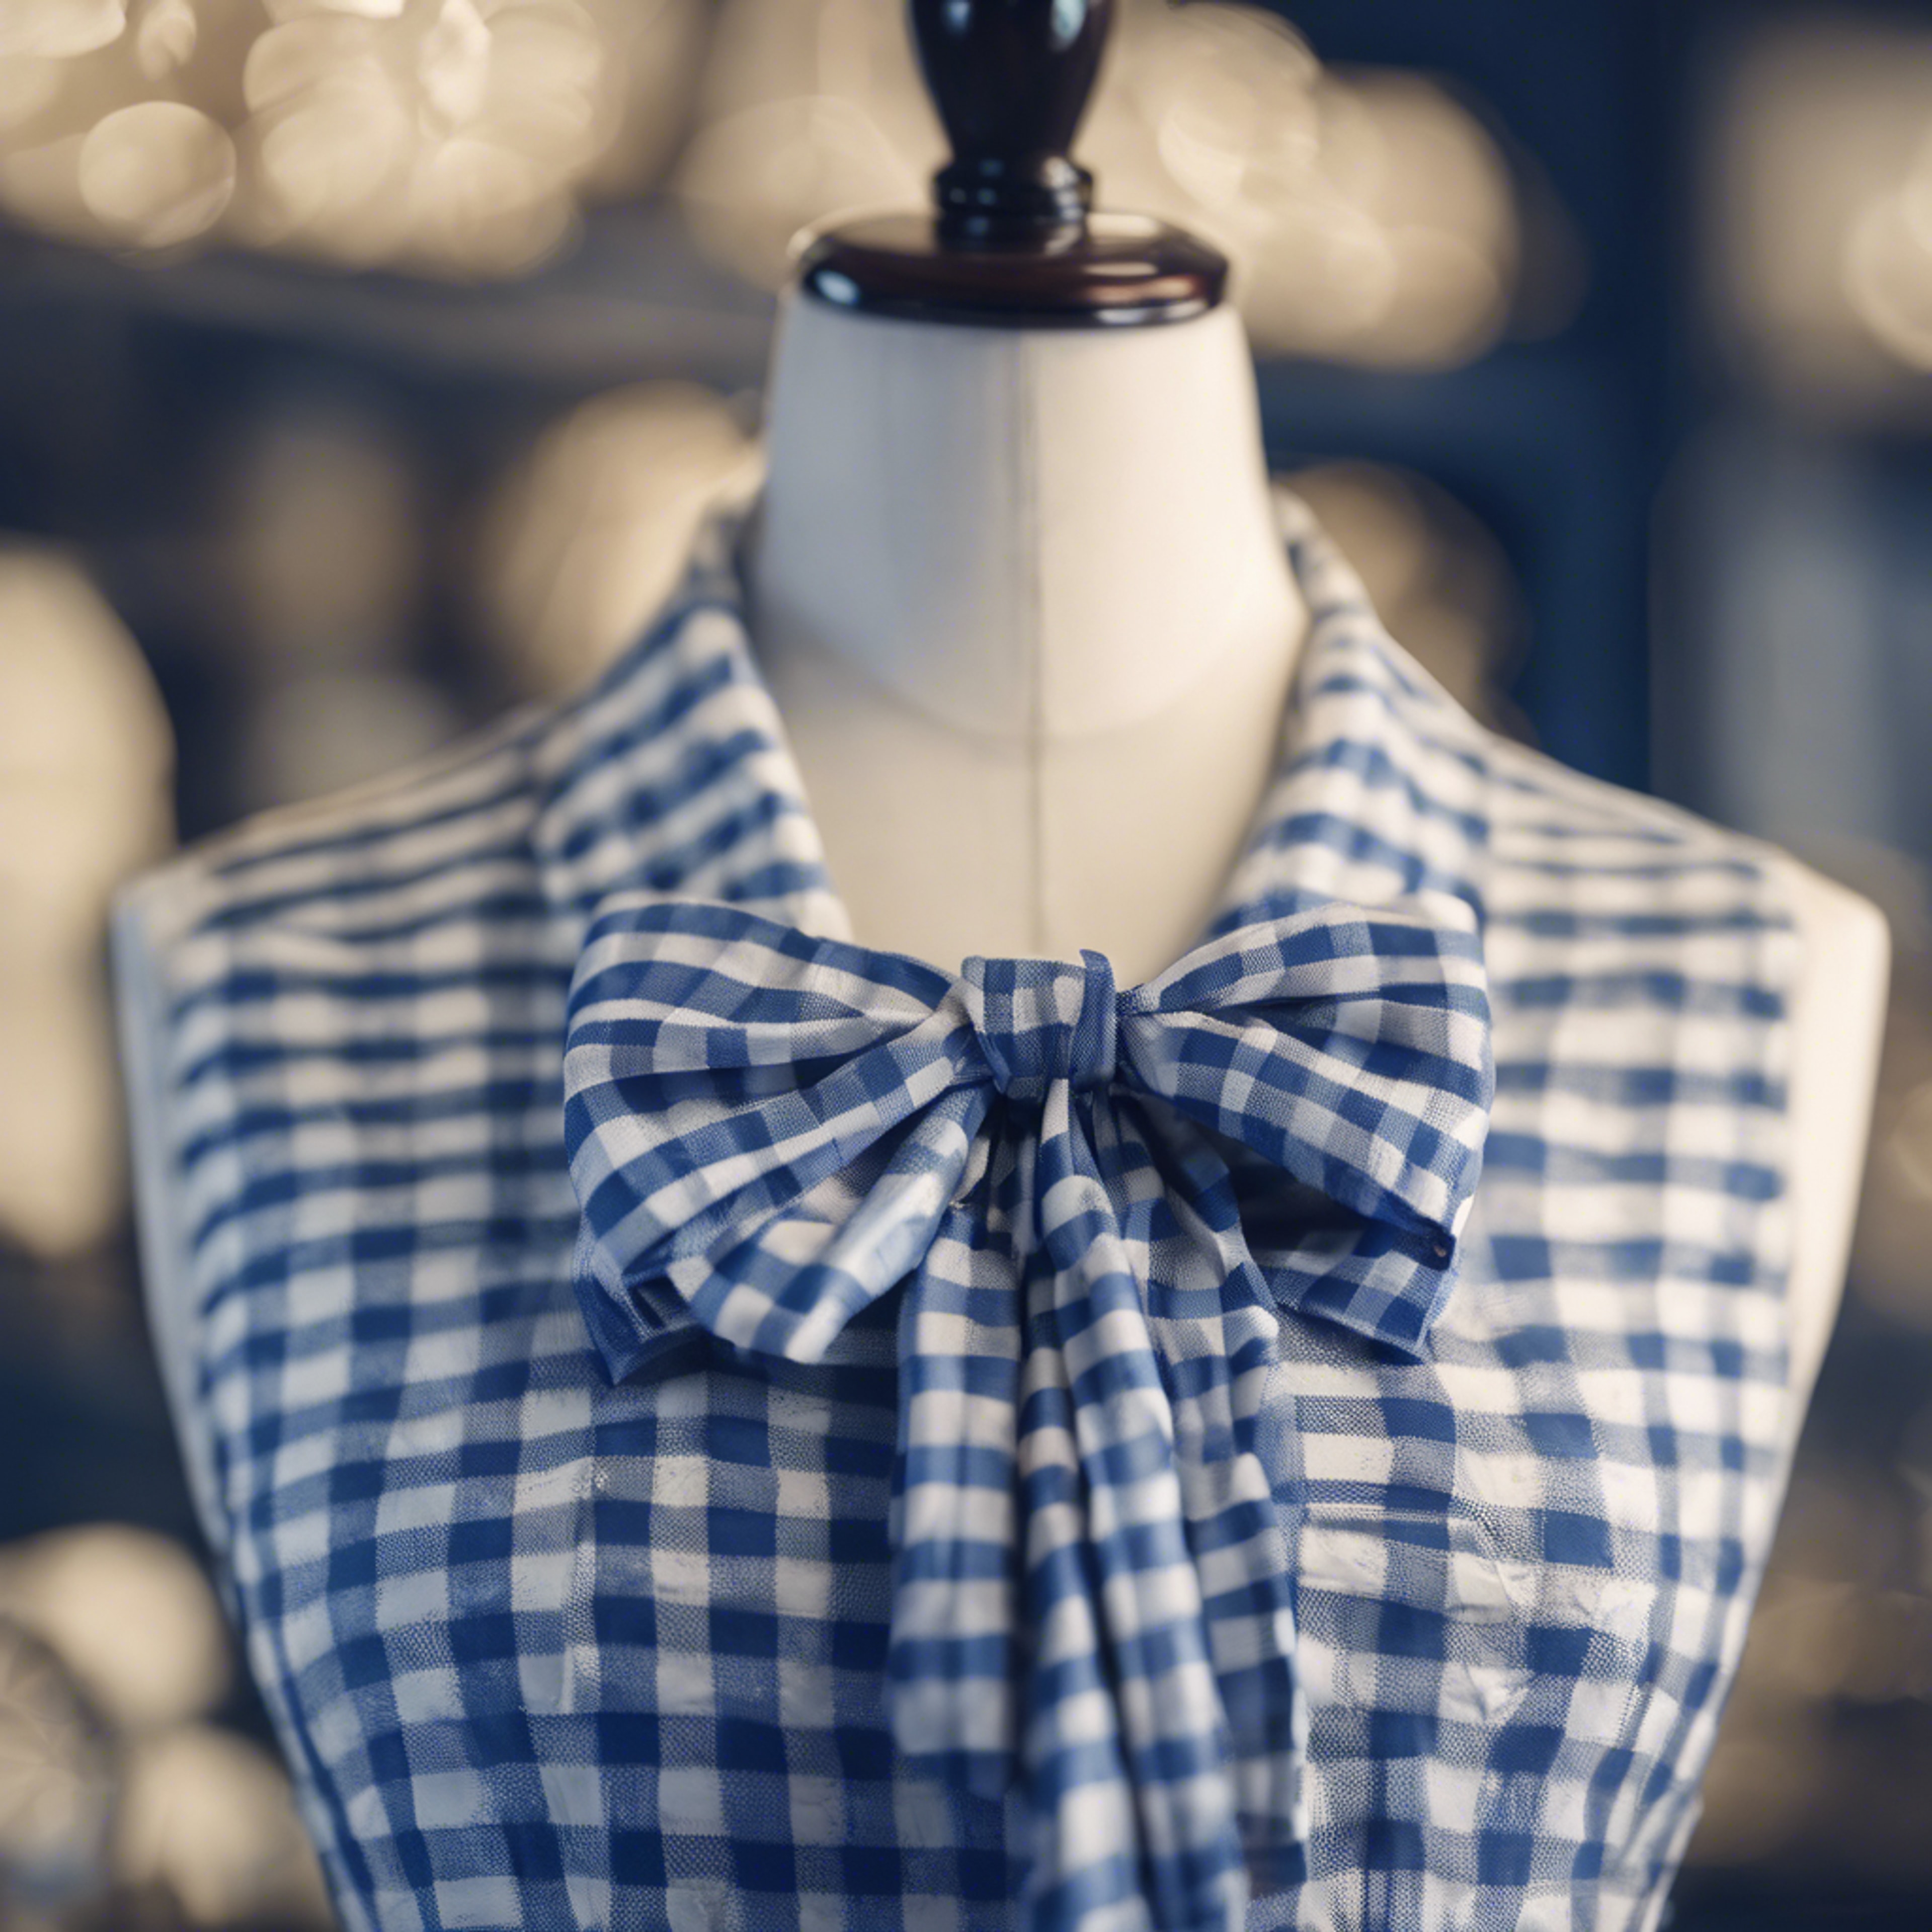 A preppy style blue and white chequered dress with a neatly tied bow on a mannequin.”壁紙[2cff79e4d79d40c780d3]